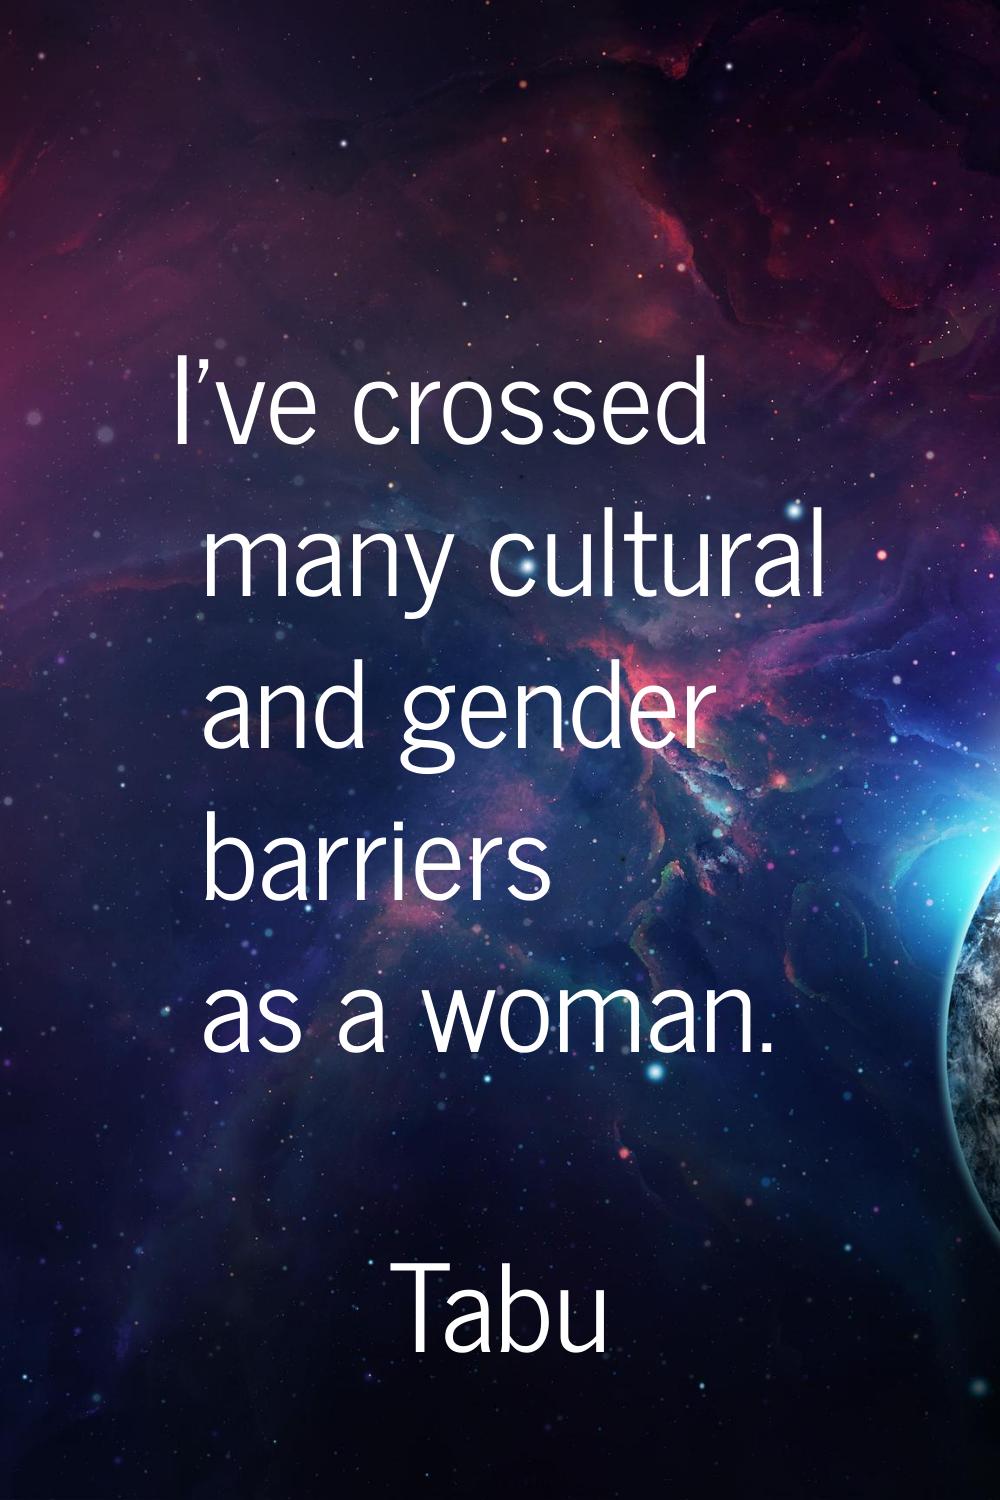 I've crossed many cultural and gender barriers as a woman.